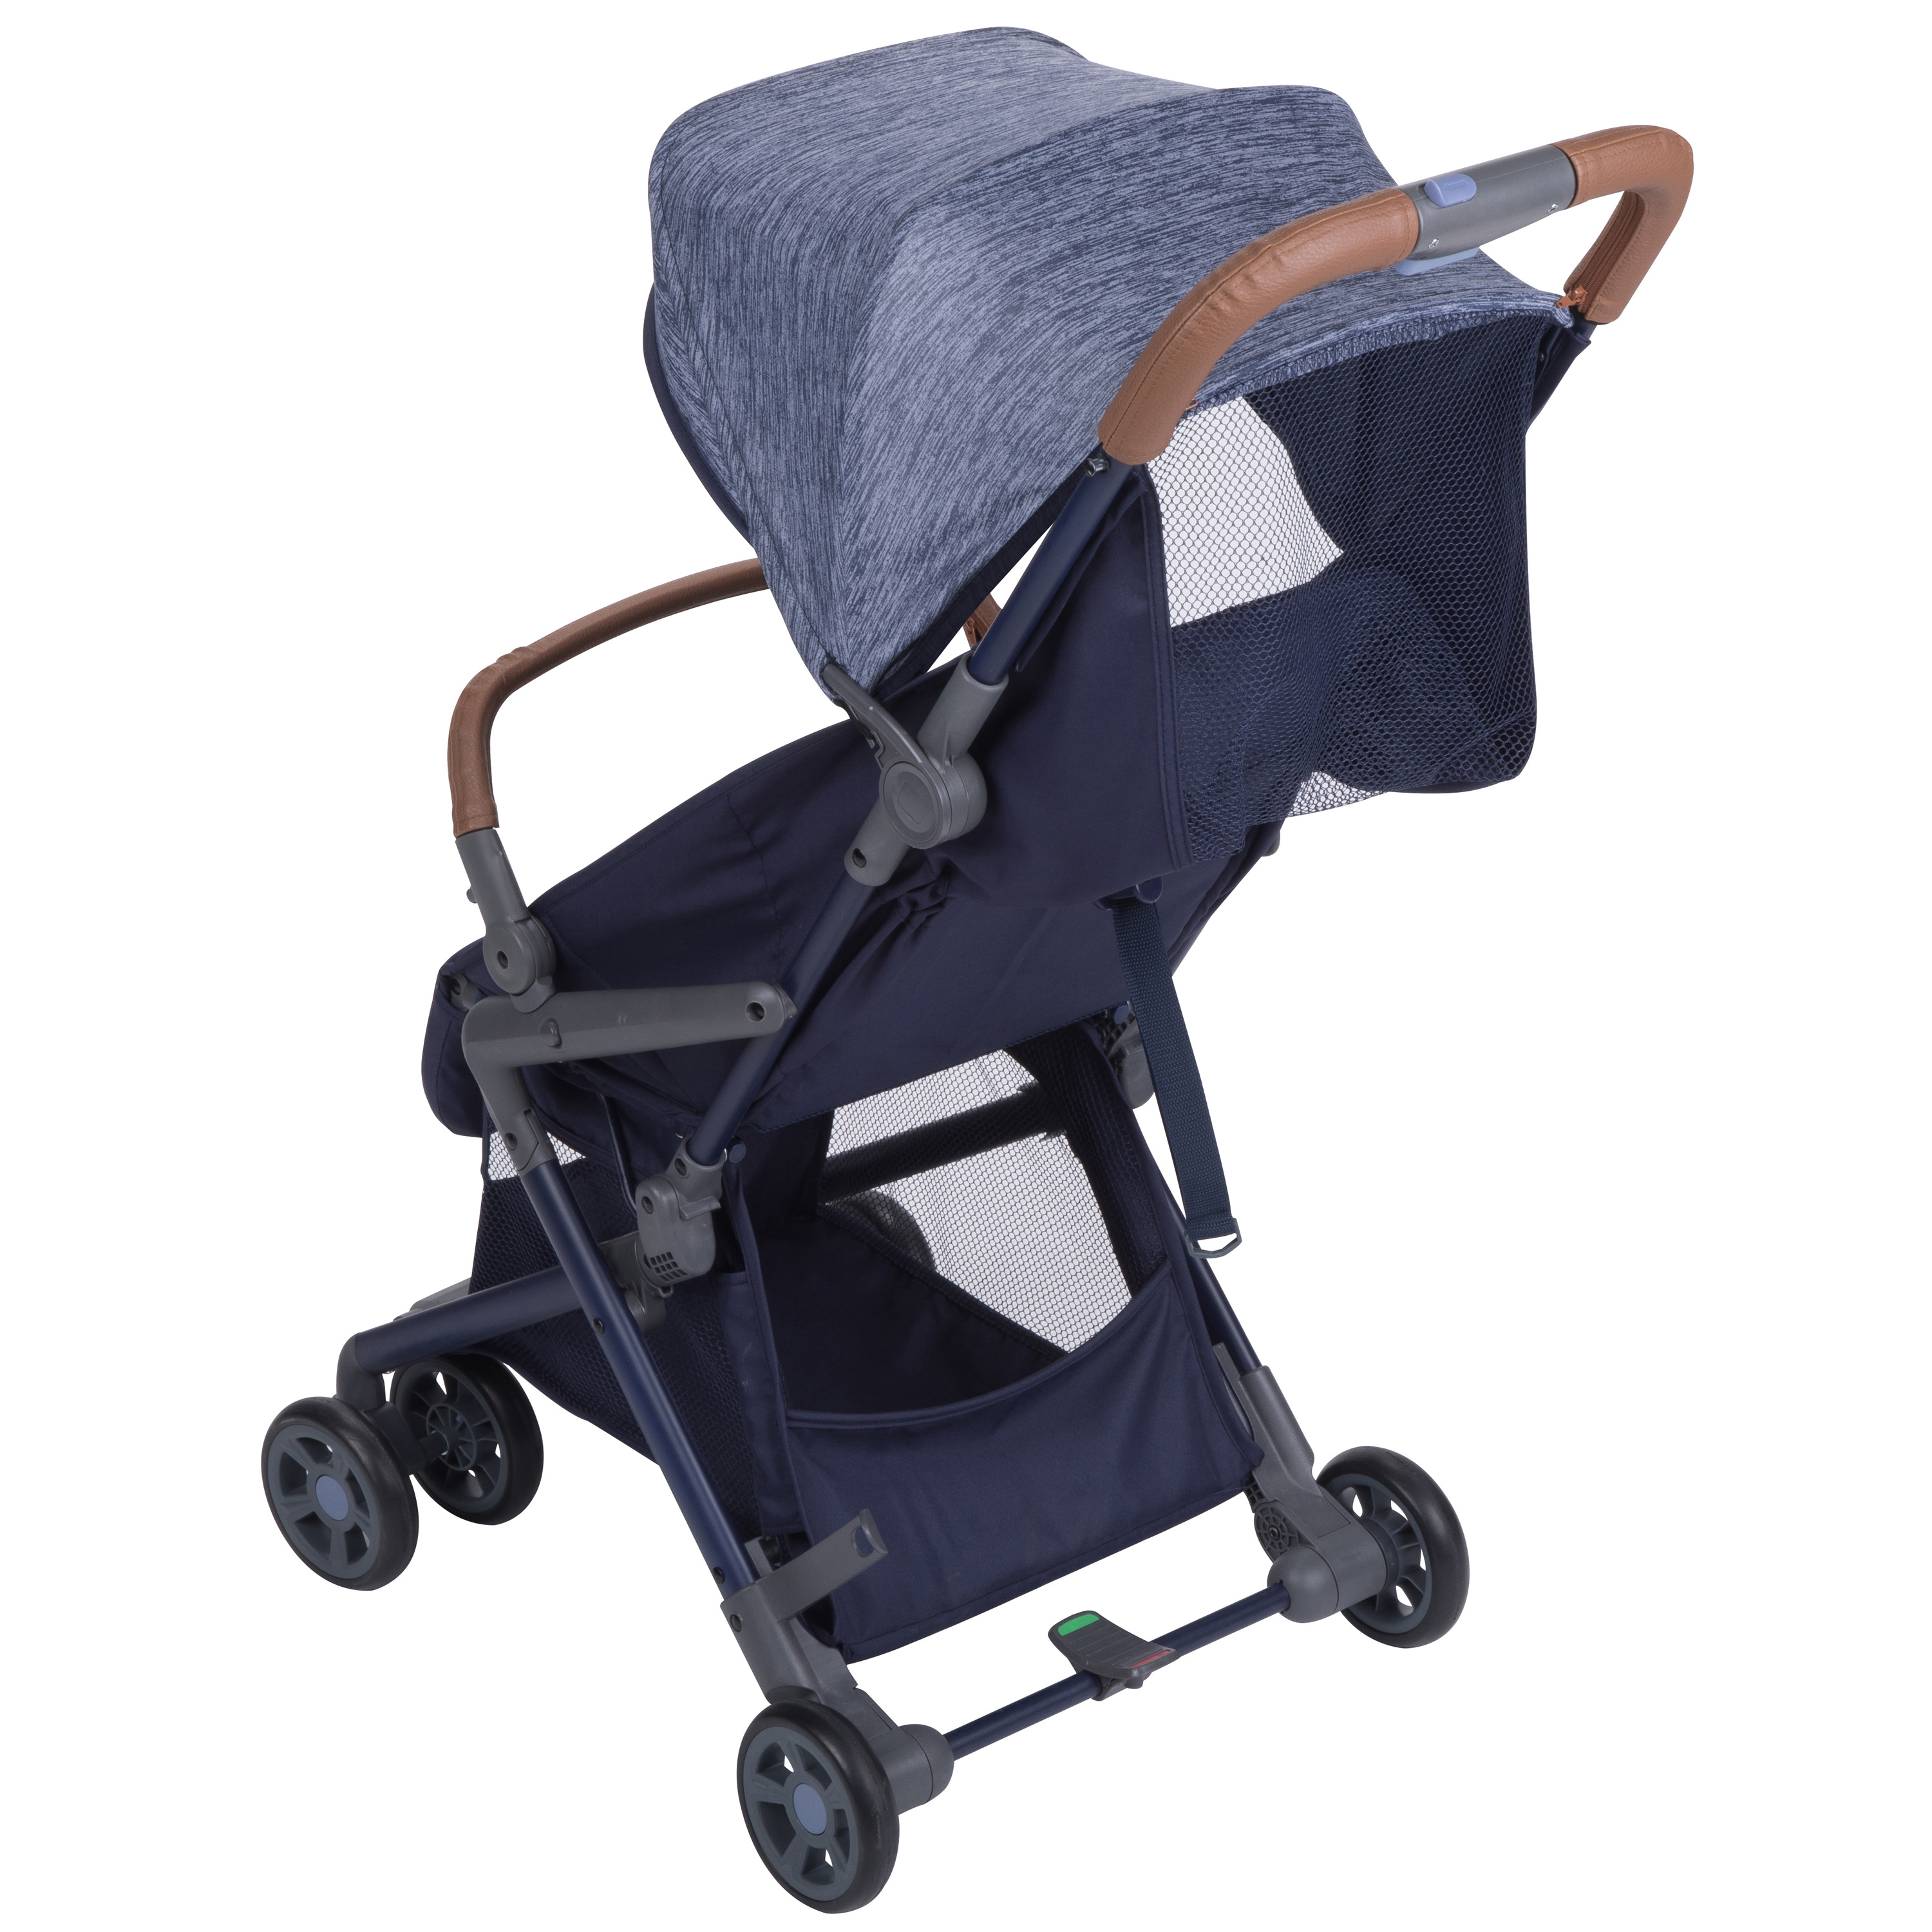 MonBebe Cube Compact Stroller with storage and visor, Blue Boho - image 7 of 17